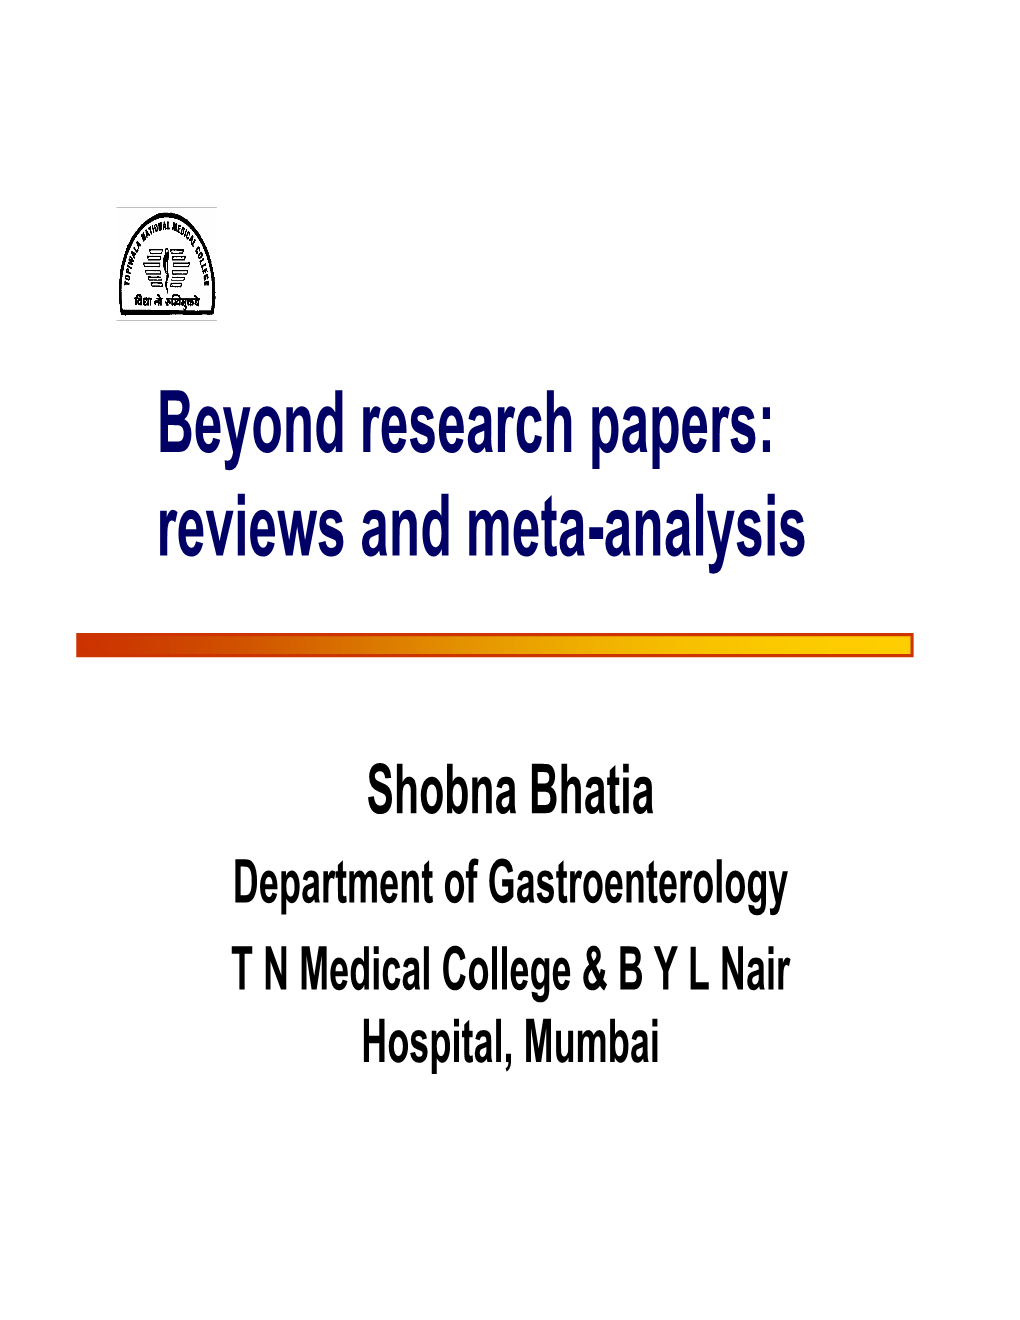 Beyond Research Papers: Reviews and Meta-Analysis